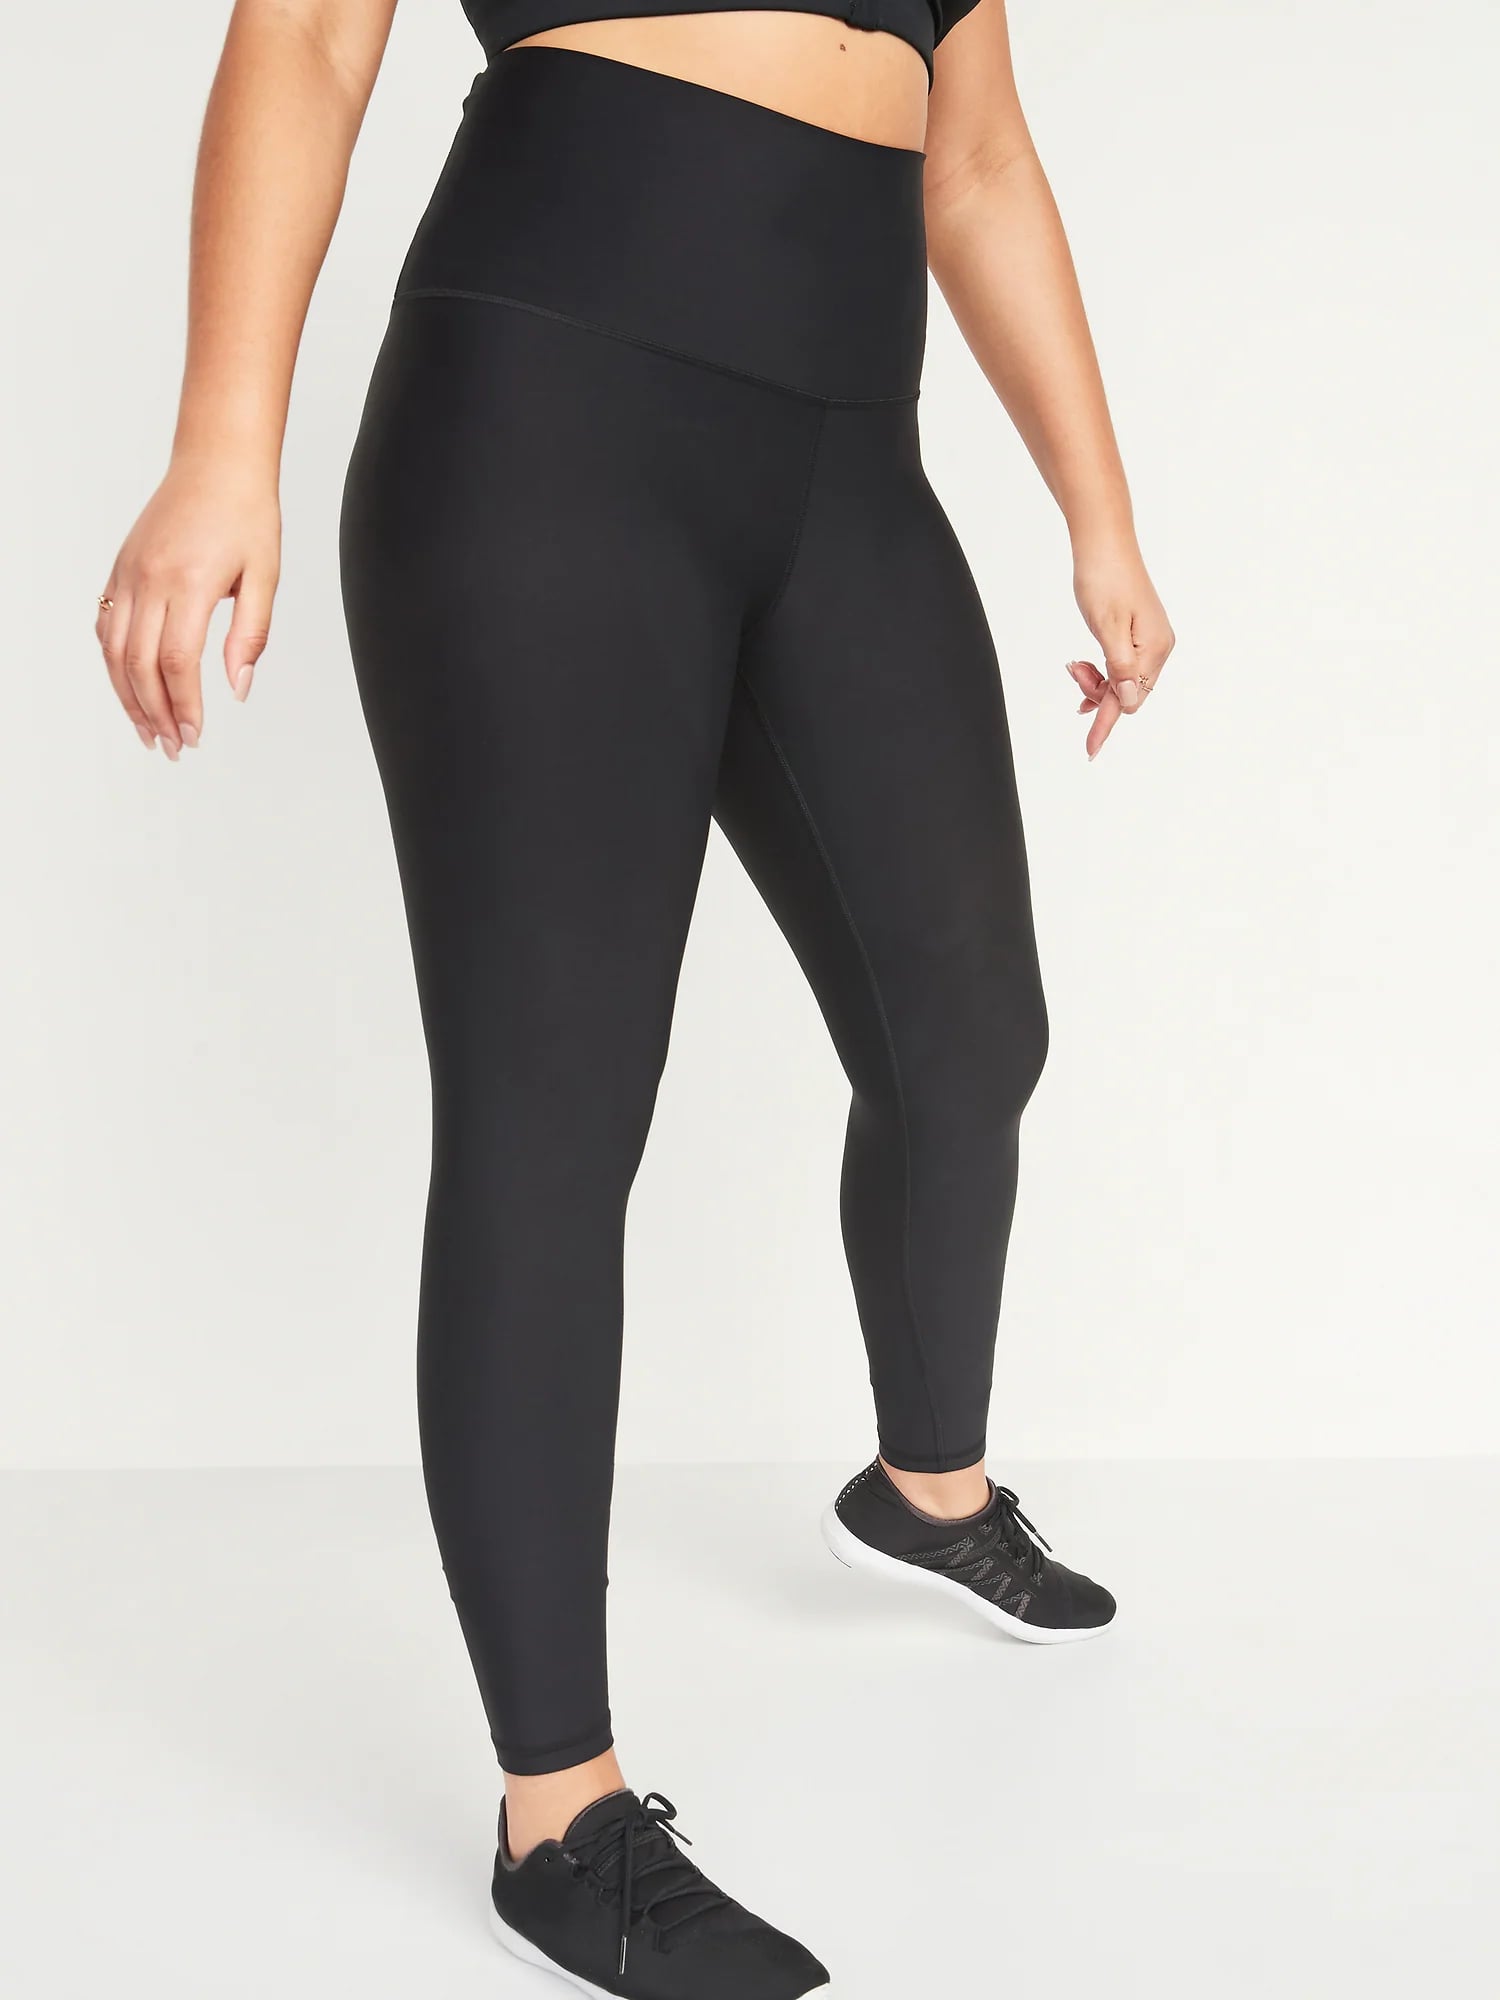 High-Waisted Workout Leggings From Old Navy, Editor Review